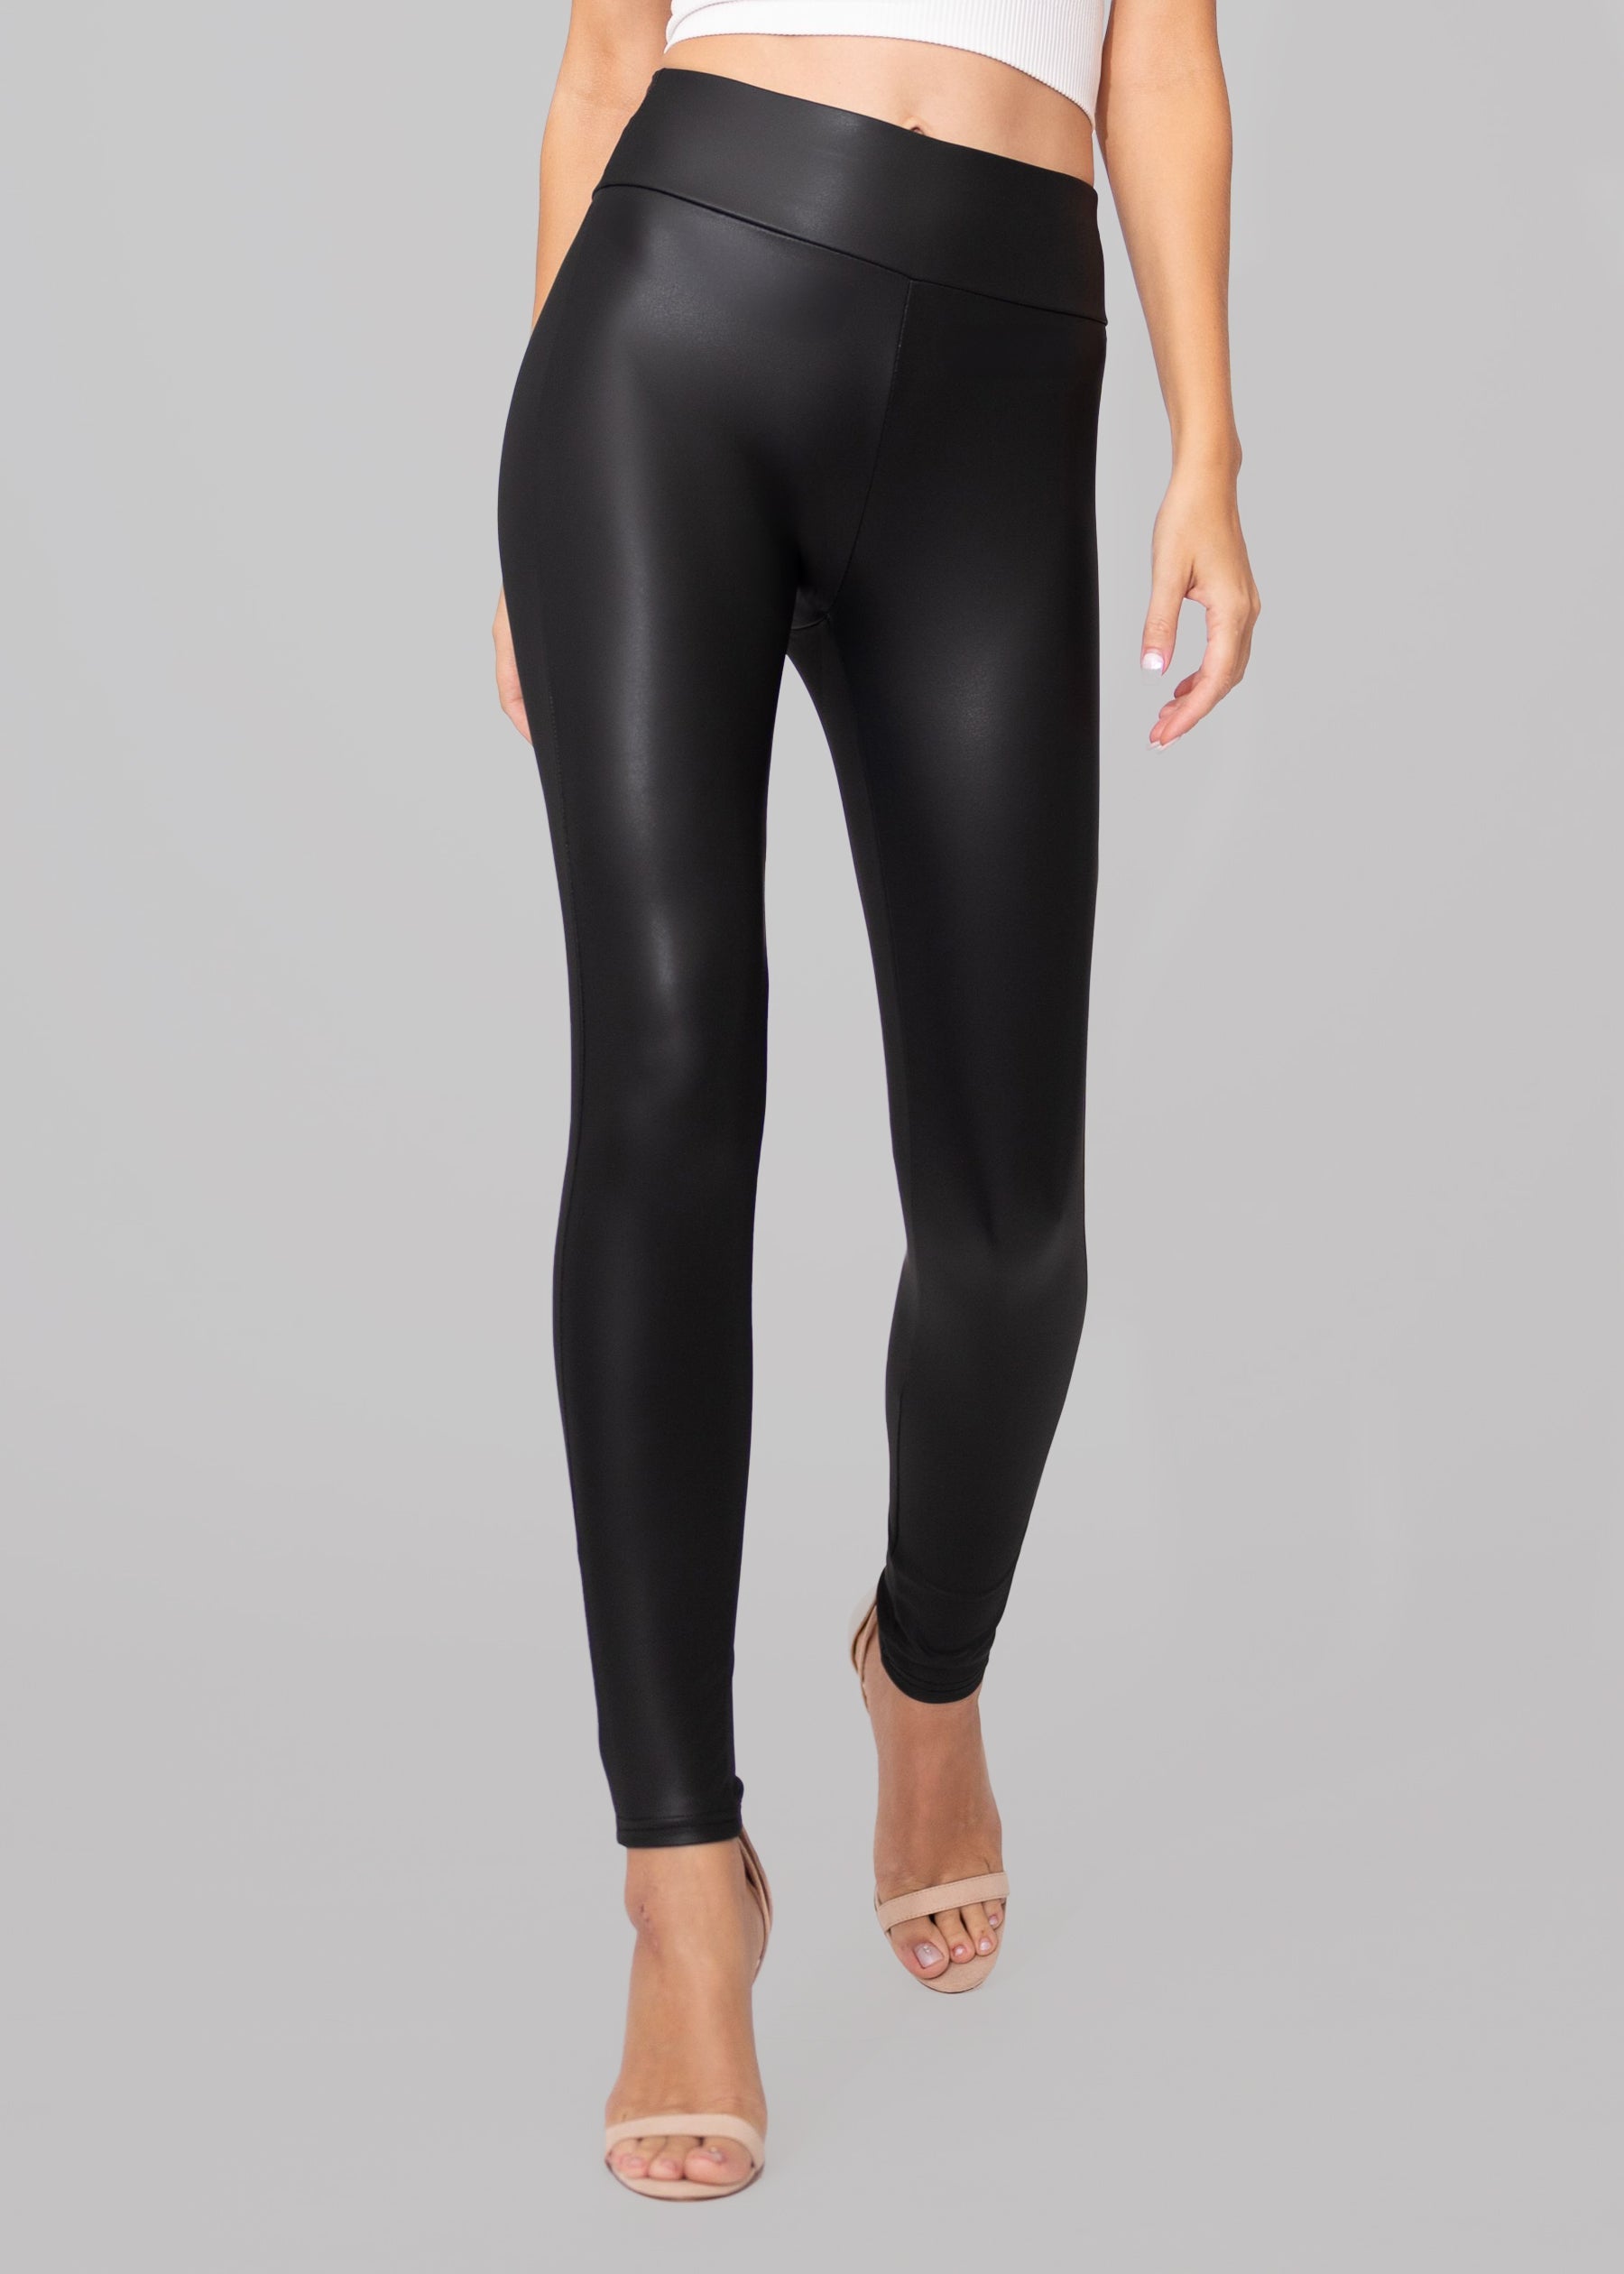 conceited. Black Leggings Size 2X (Plus) - 36% off